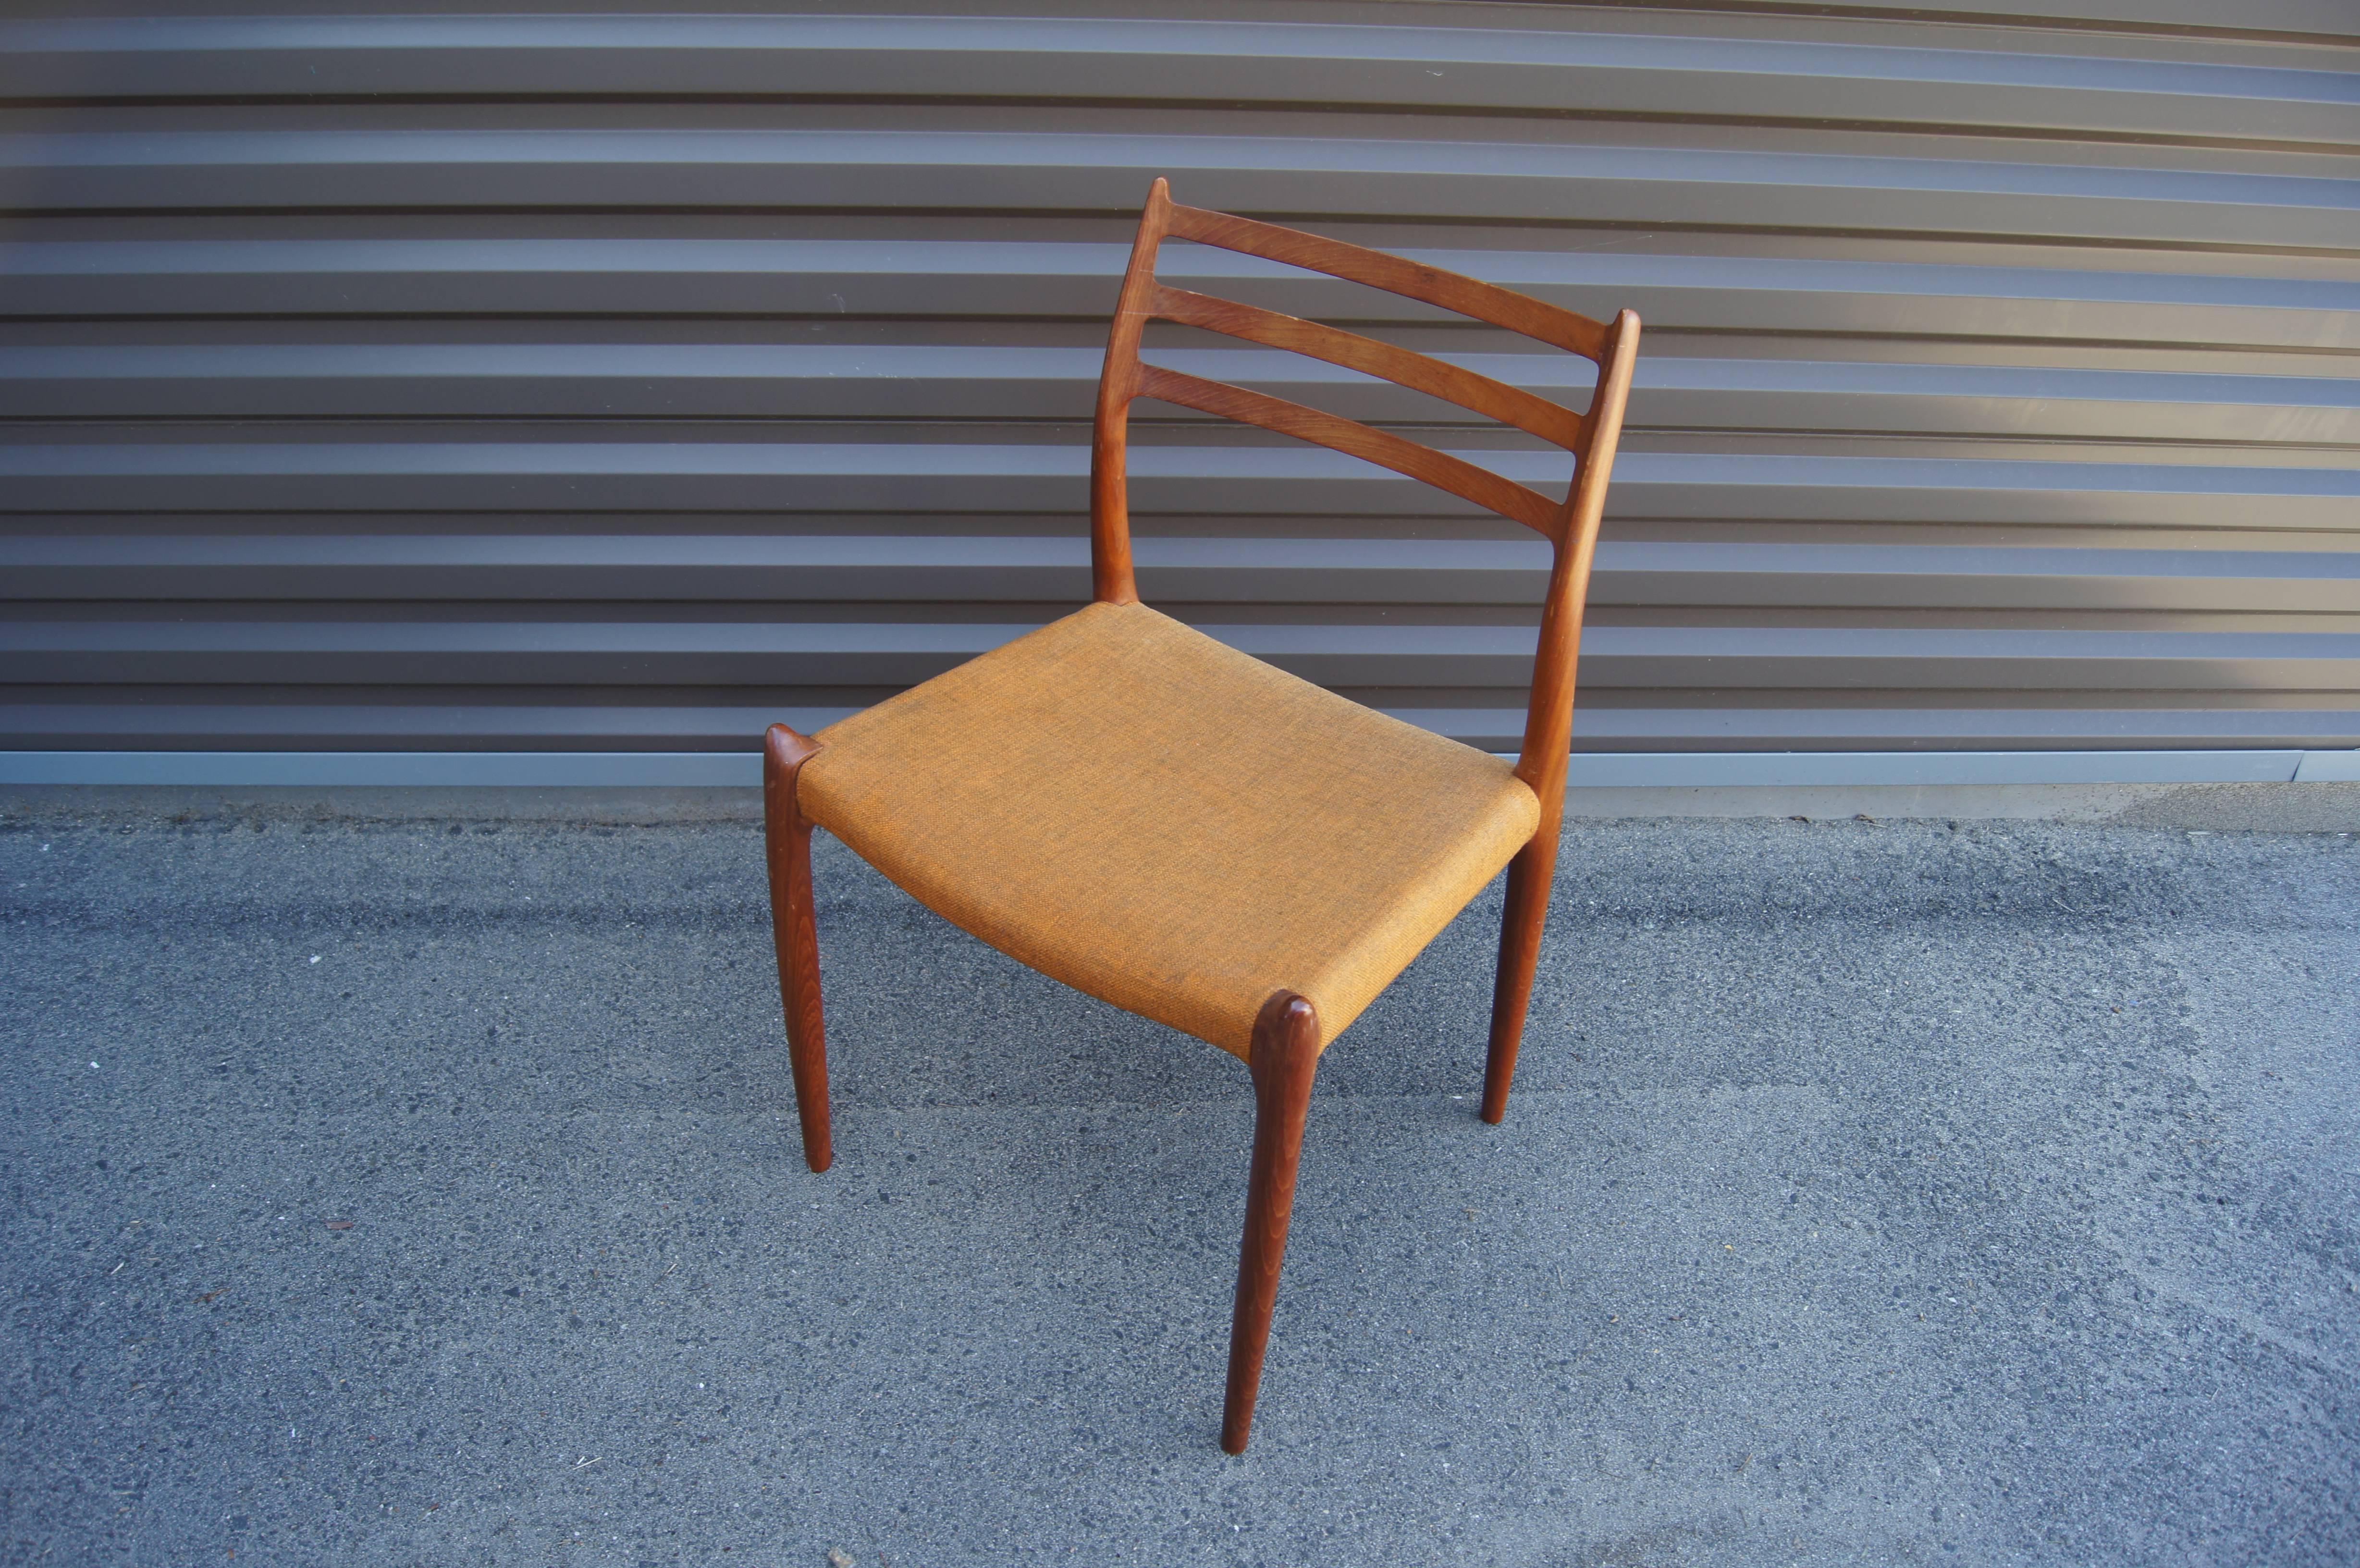 Niels O. Møller designed this side chair, model 78, in 1954 for J.L. Møllers Møbelfabrik. The solid teak frame has delicate lines, with hornlike details on the backrest and where the legs meet the seat. 

All six chairs retain the original woven